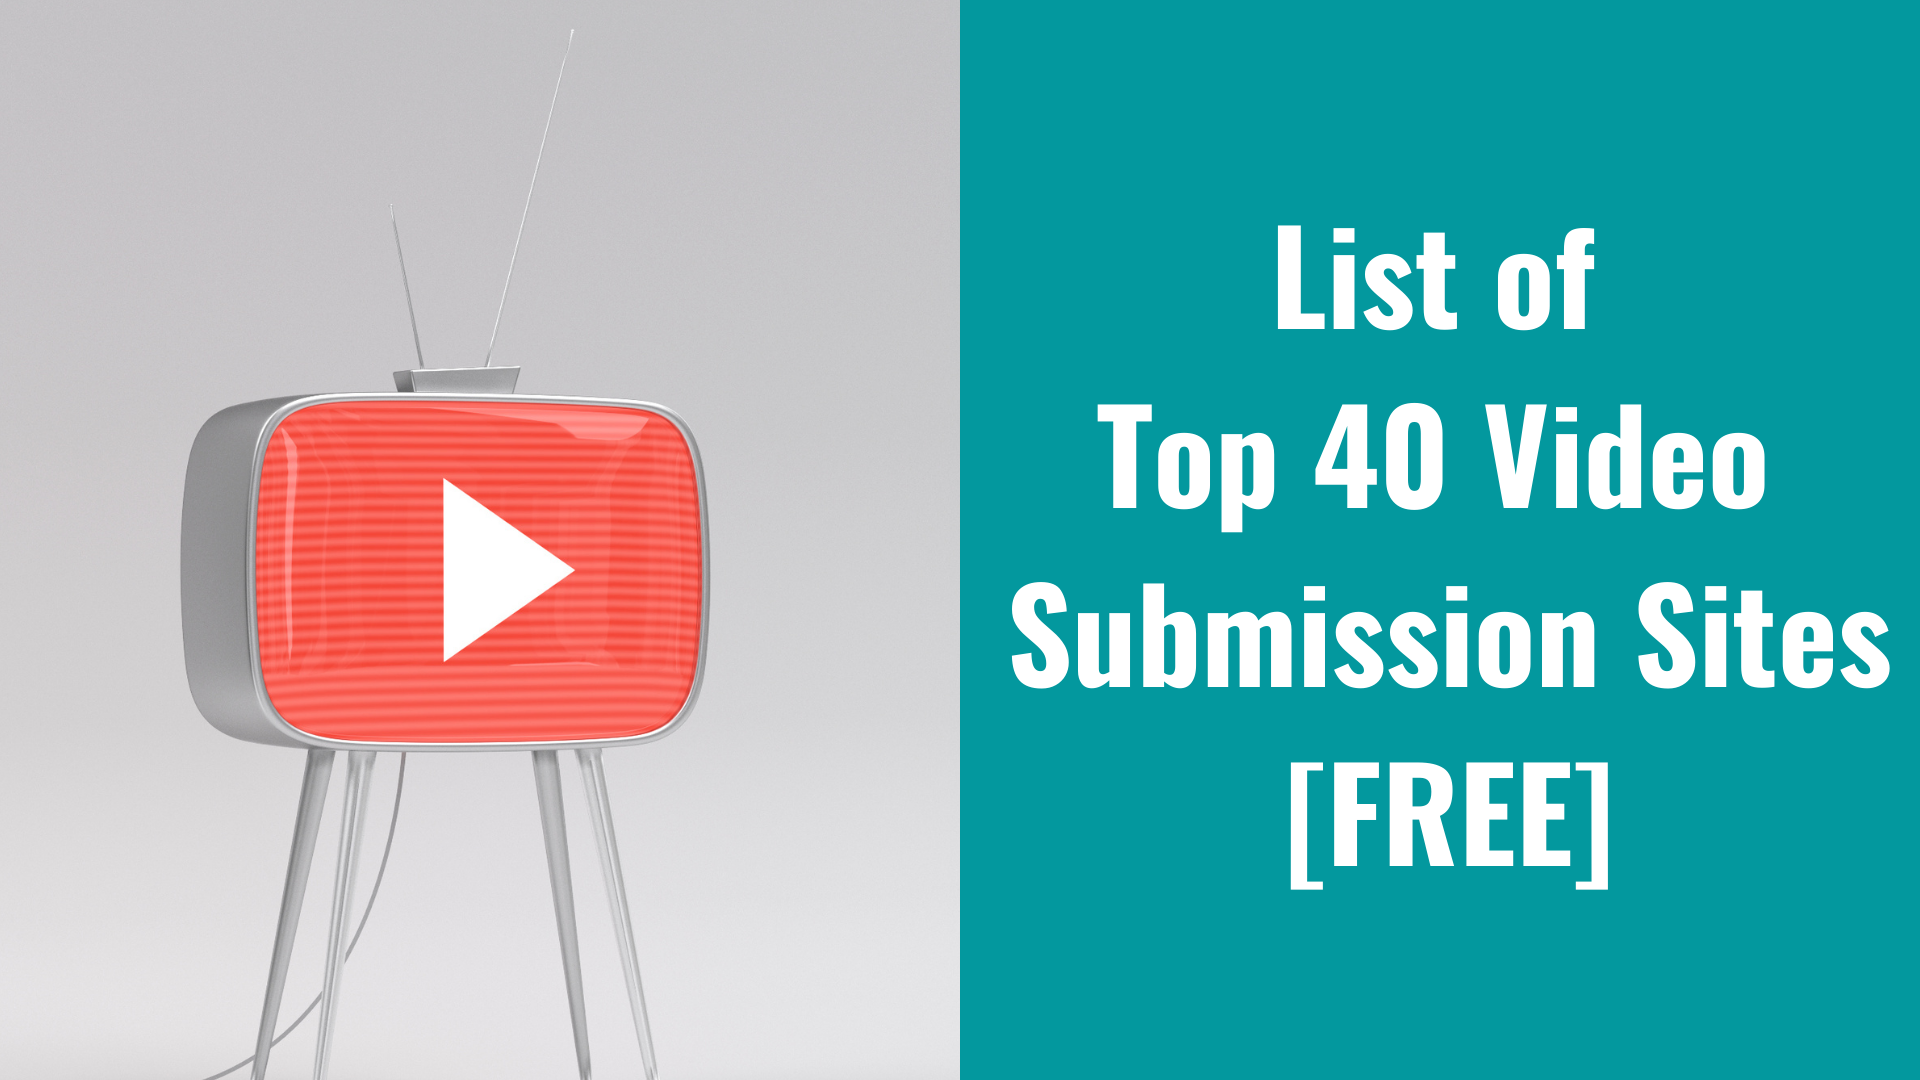 List of Top 40 Video Submission Sites